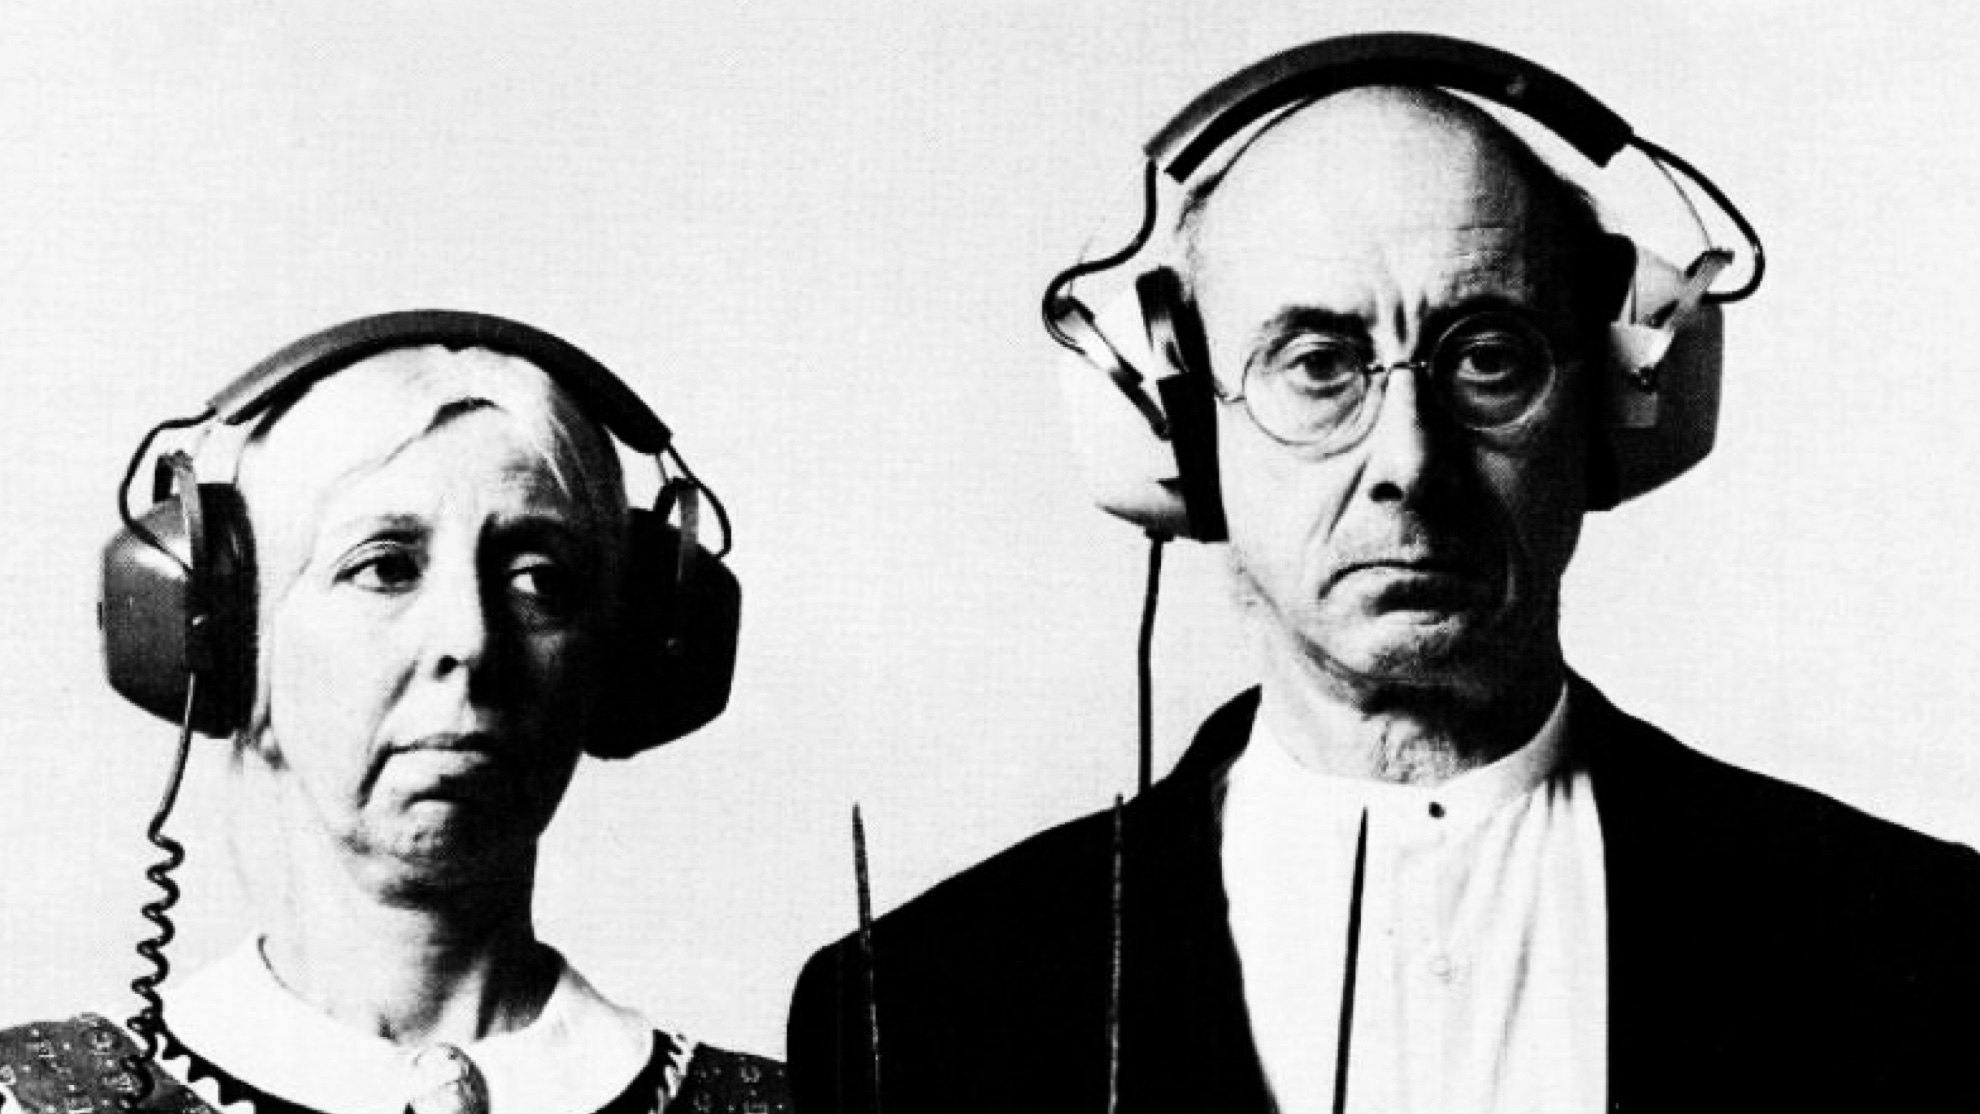 A 197s RCA ad showing two people wearing headphones